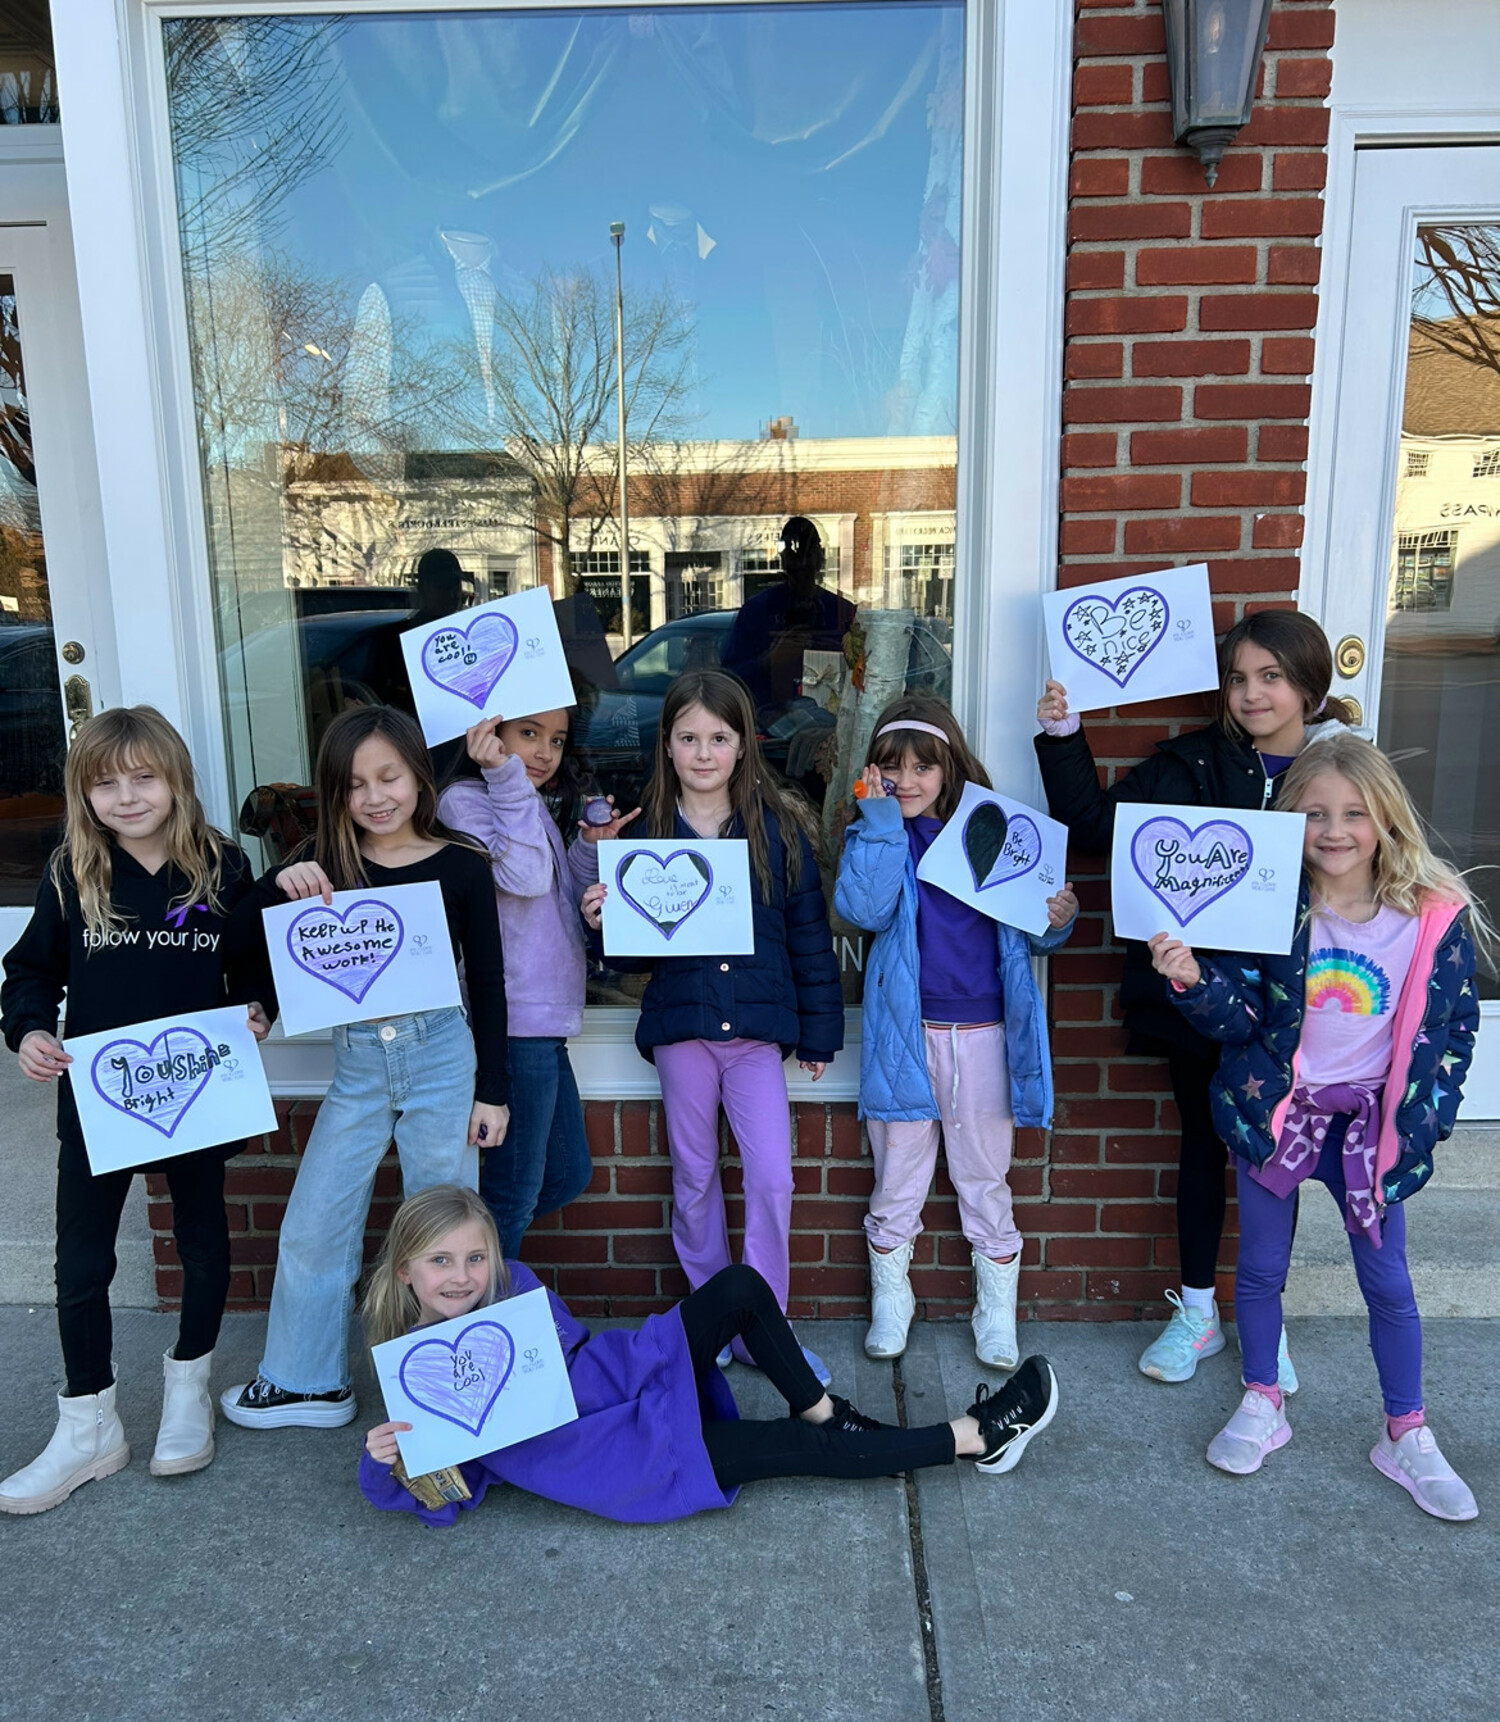 Southampton Elementary and Intermediate School students celebrated P.S. I Love You Day during the week of February 5. Students at both schools participated in assemblies with P.S. I Love You Day founder Brooke DiParma and learned about the initiative’s mission to thwart bullying and promote kindness. They wore purple to mark the day and took part in kindness activities. Additionally, members of Southampton Elementary School’s Rotary Club hung purple kindness messages in store windows around town. COURTESY SOUTHAMPTON SCHOOL DISTRICT